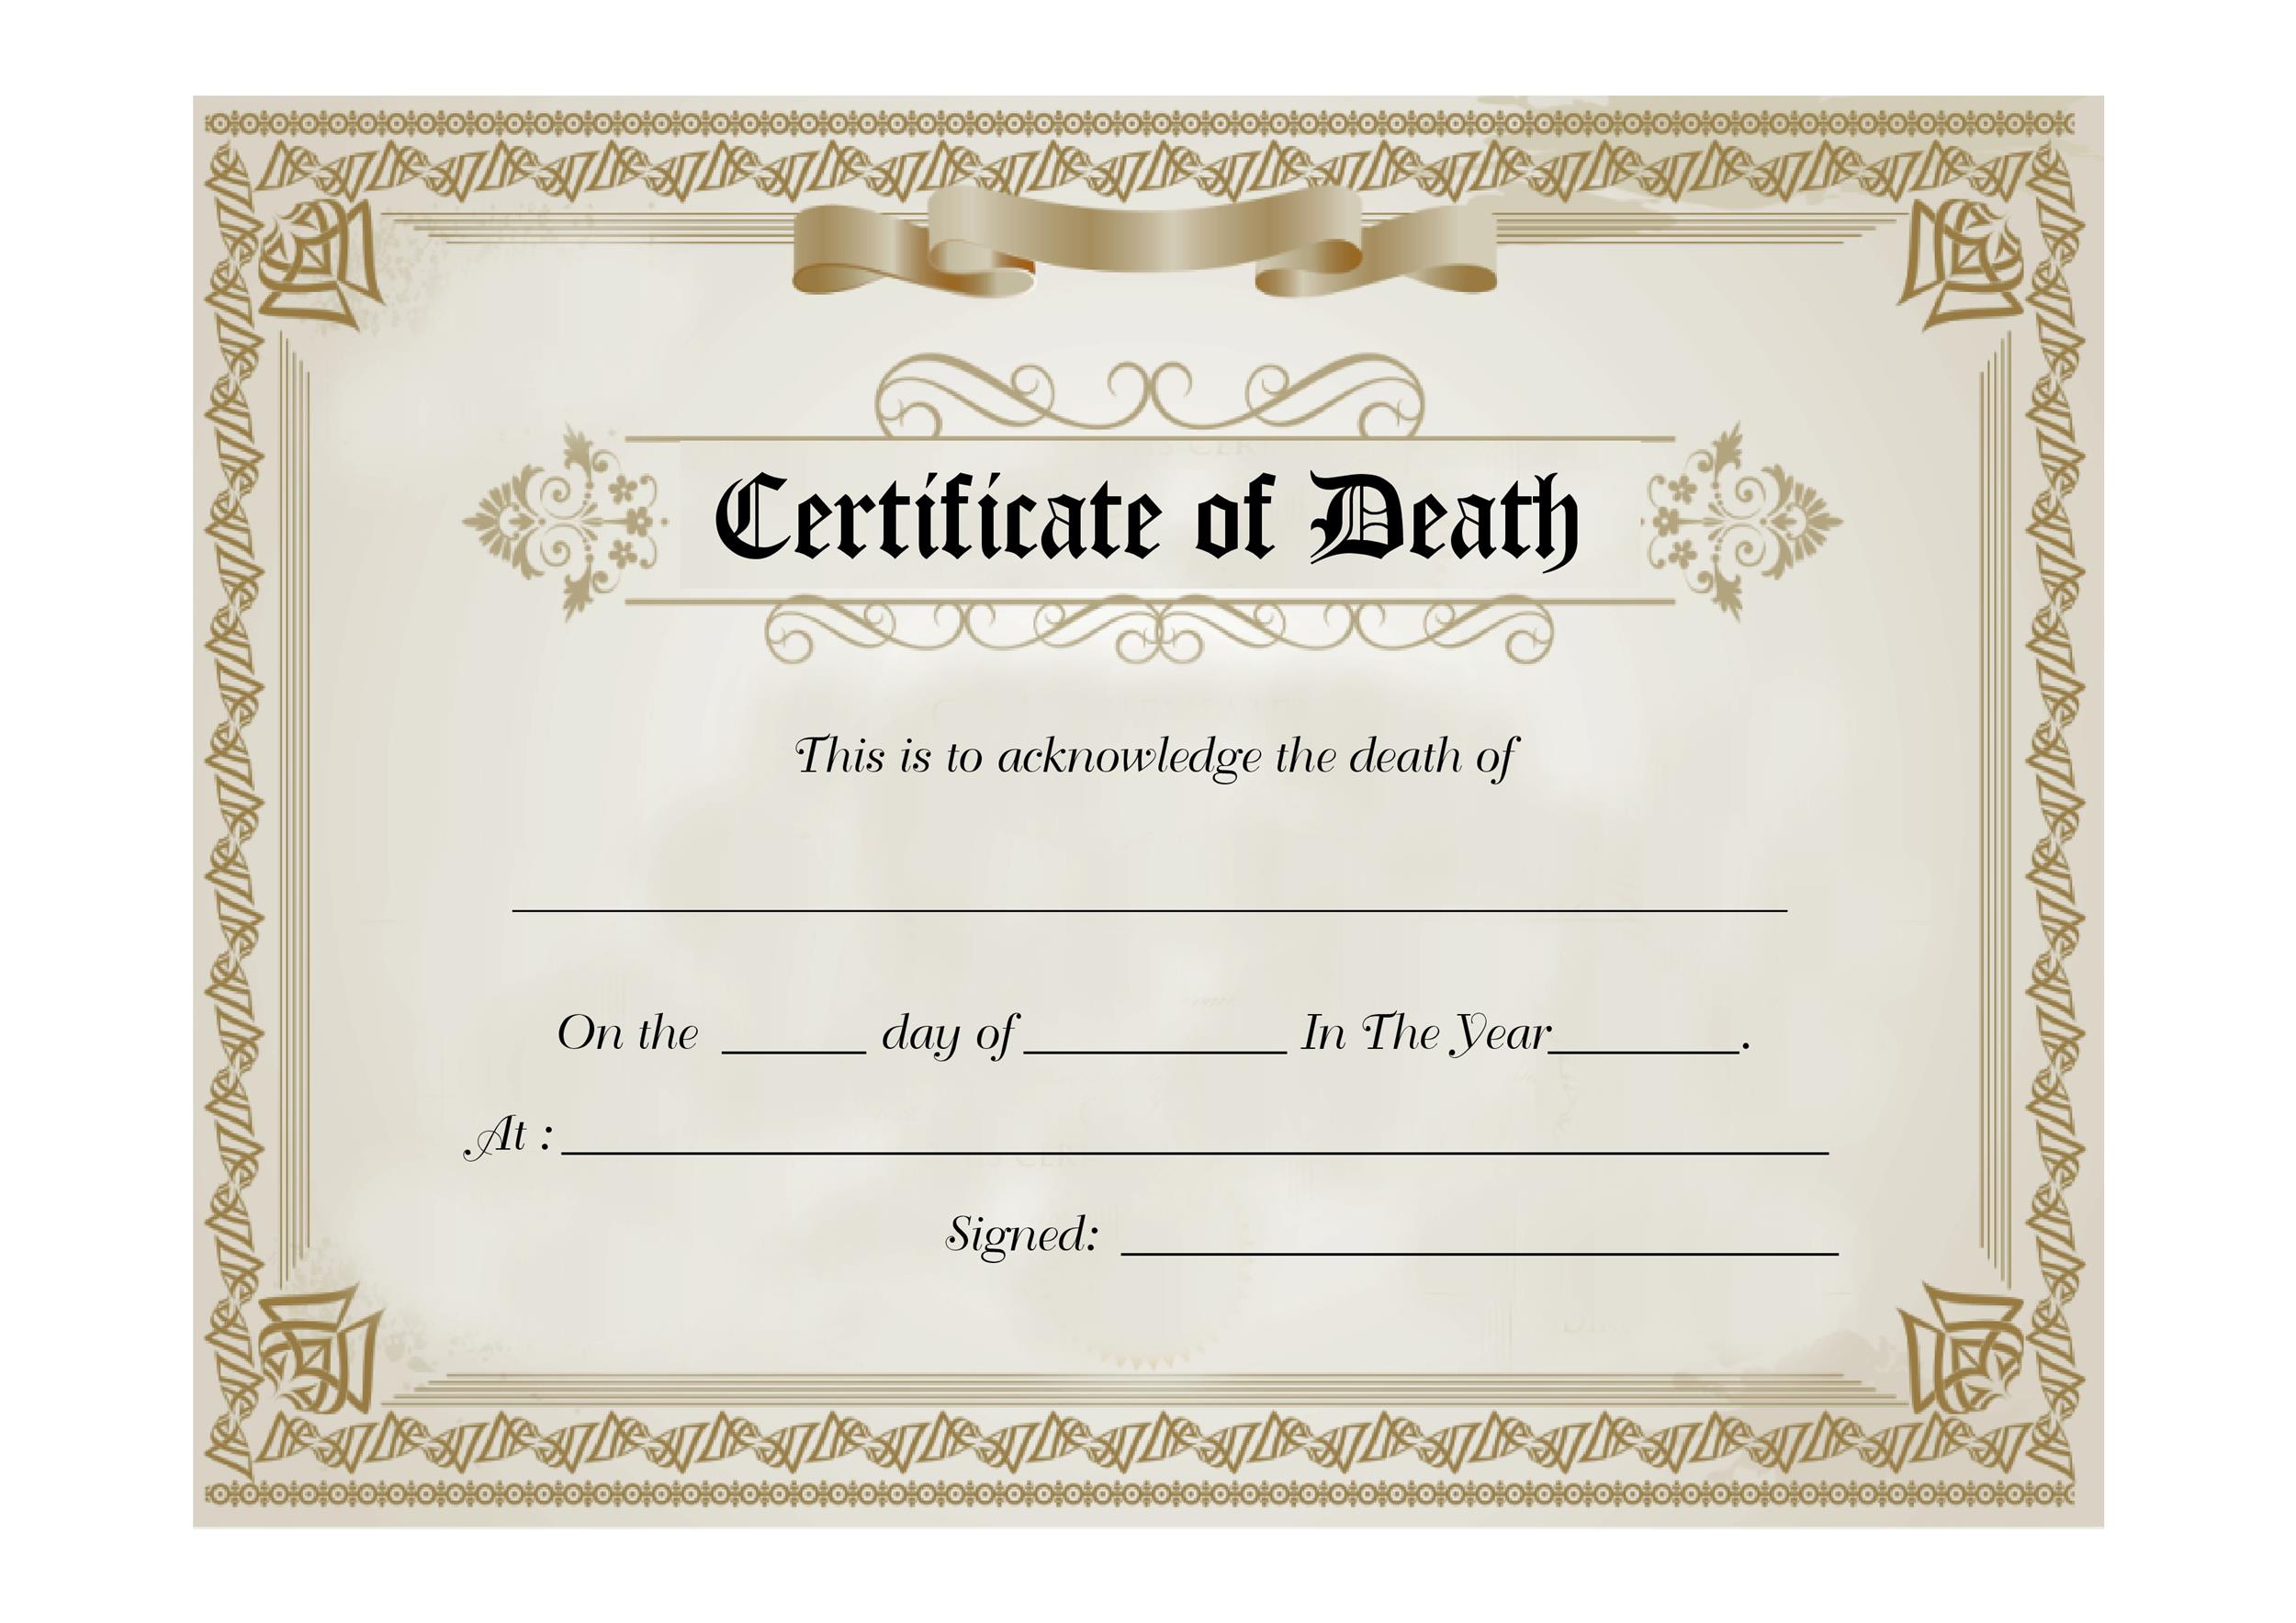 fake death certificate generator free - Ficim Pertaining To Baby Death Certificate Template